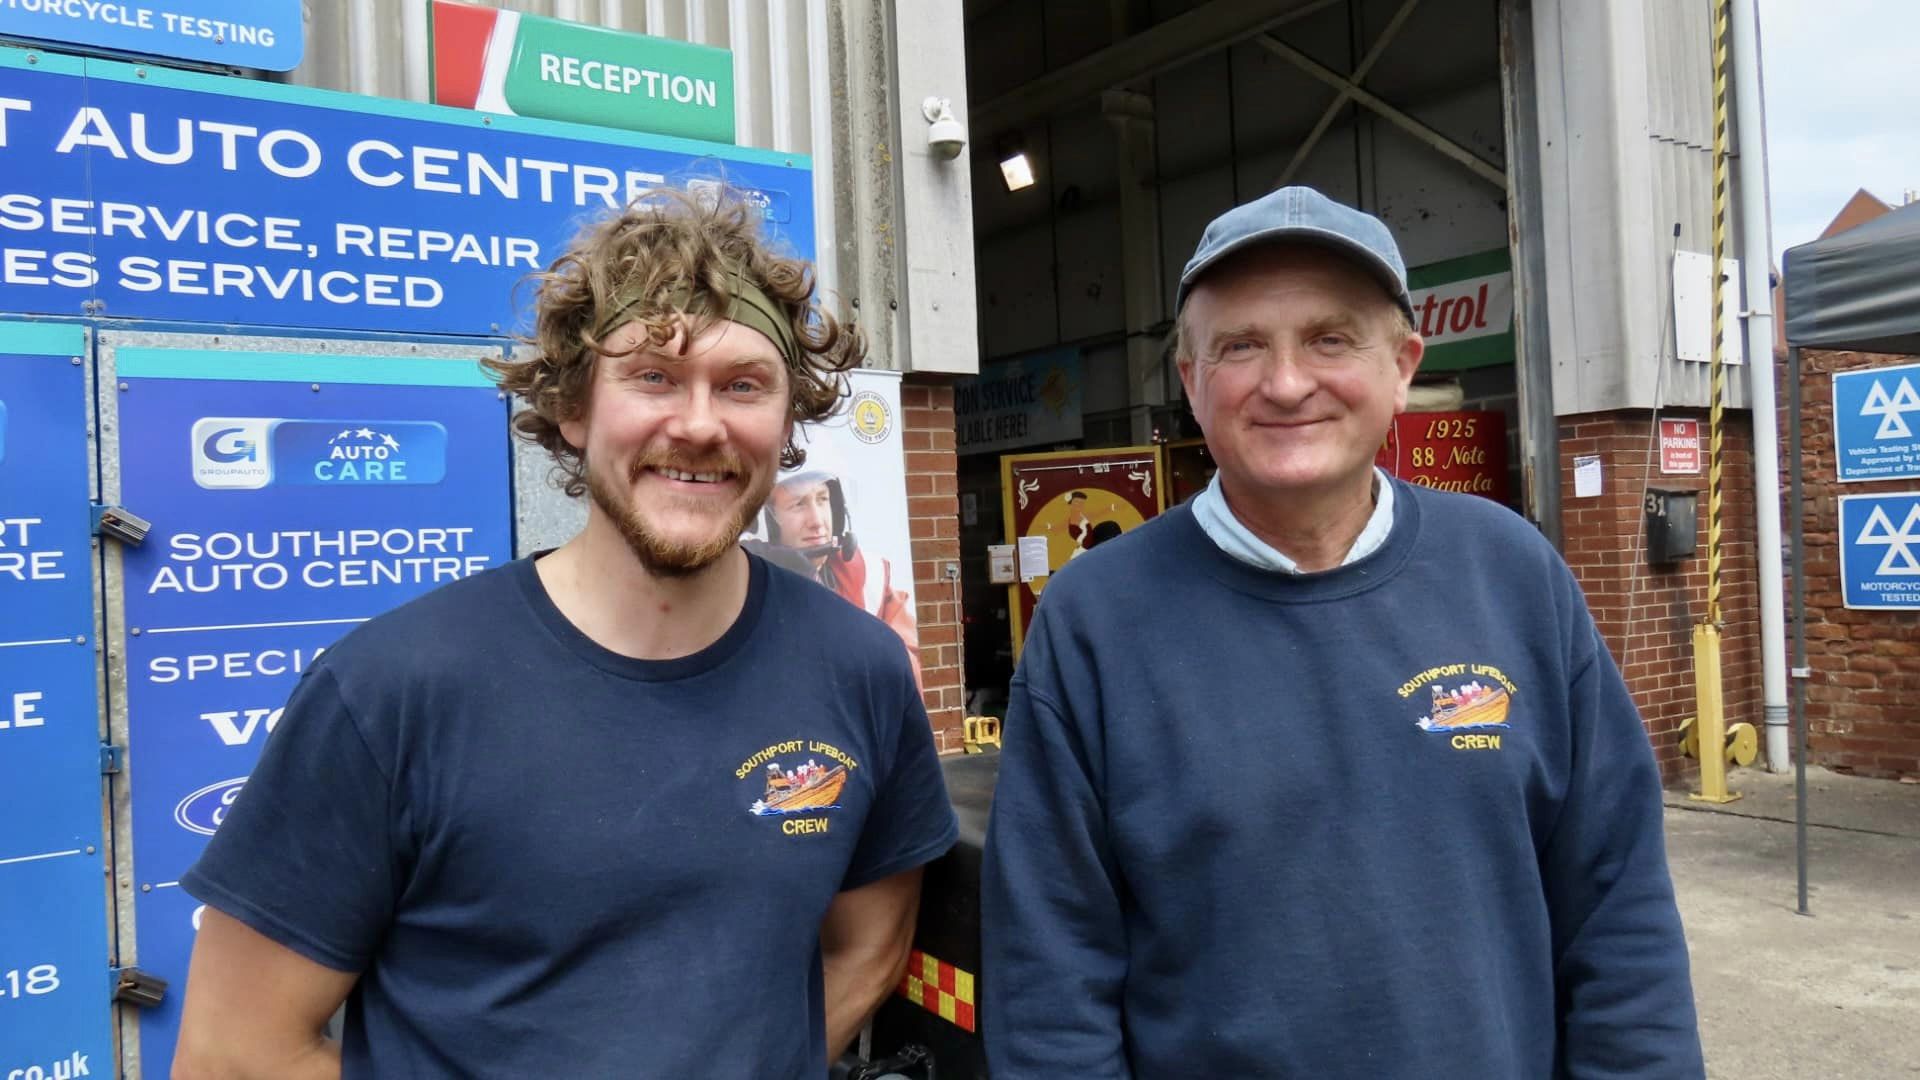 Southport Auto Centre hosted its annual Classic Car and Motorcycle Transport Fundraising Event. Volunteers from Southport Lifeboat. Photo by Andrew Brown Stand Up For Southport